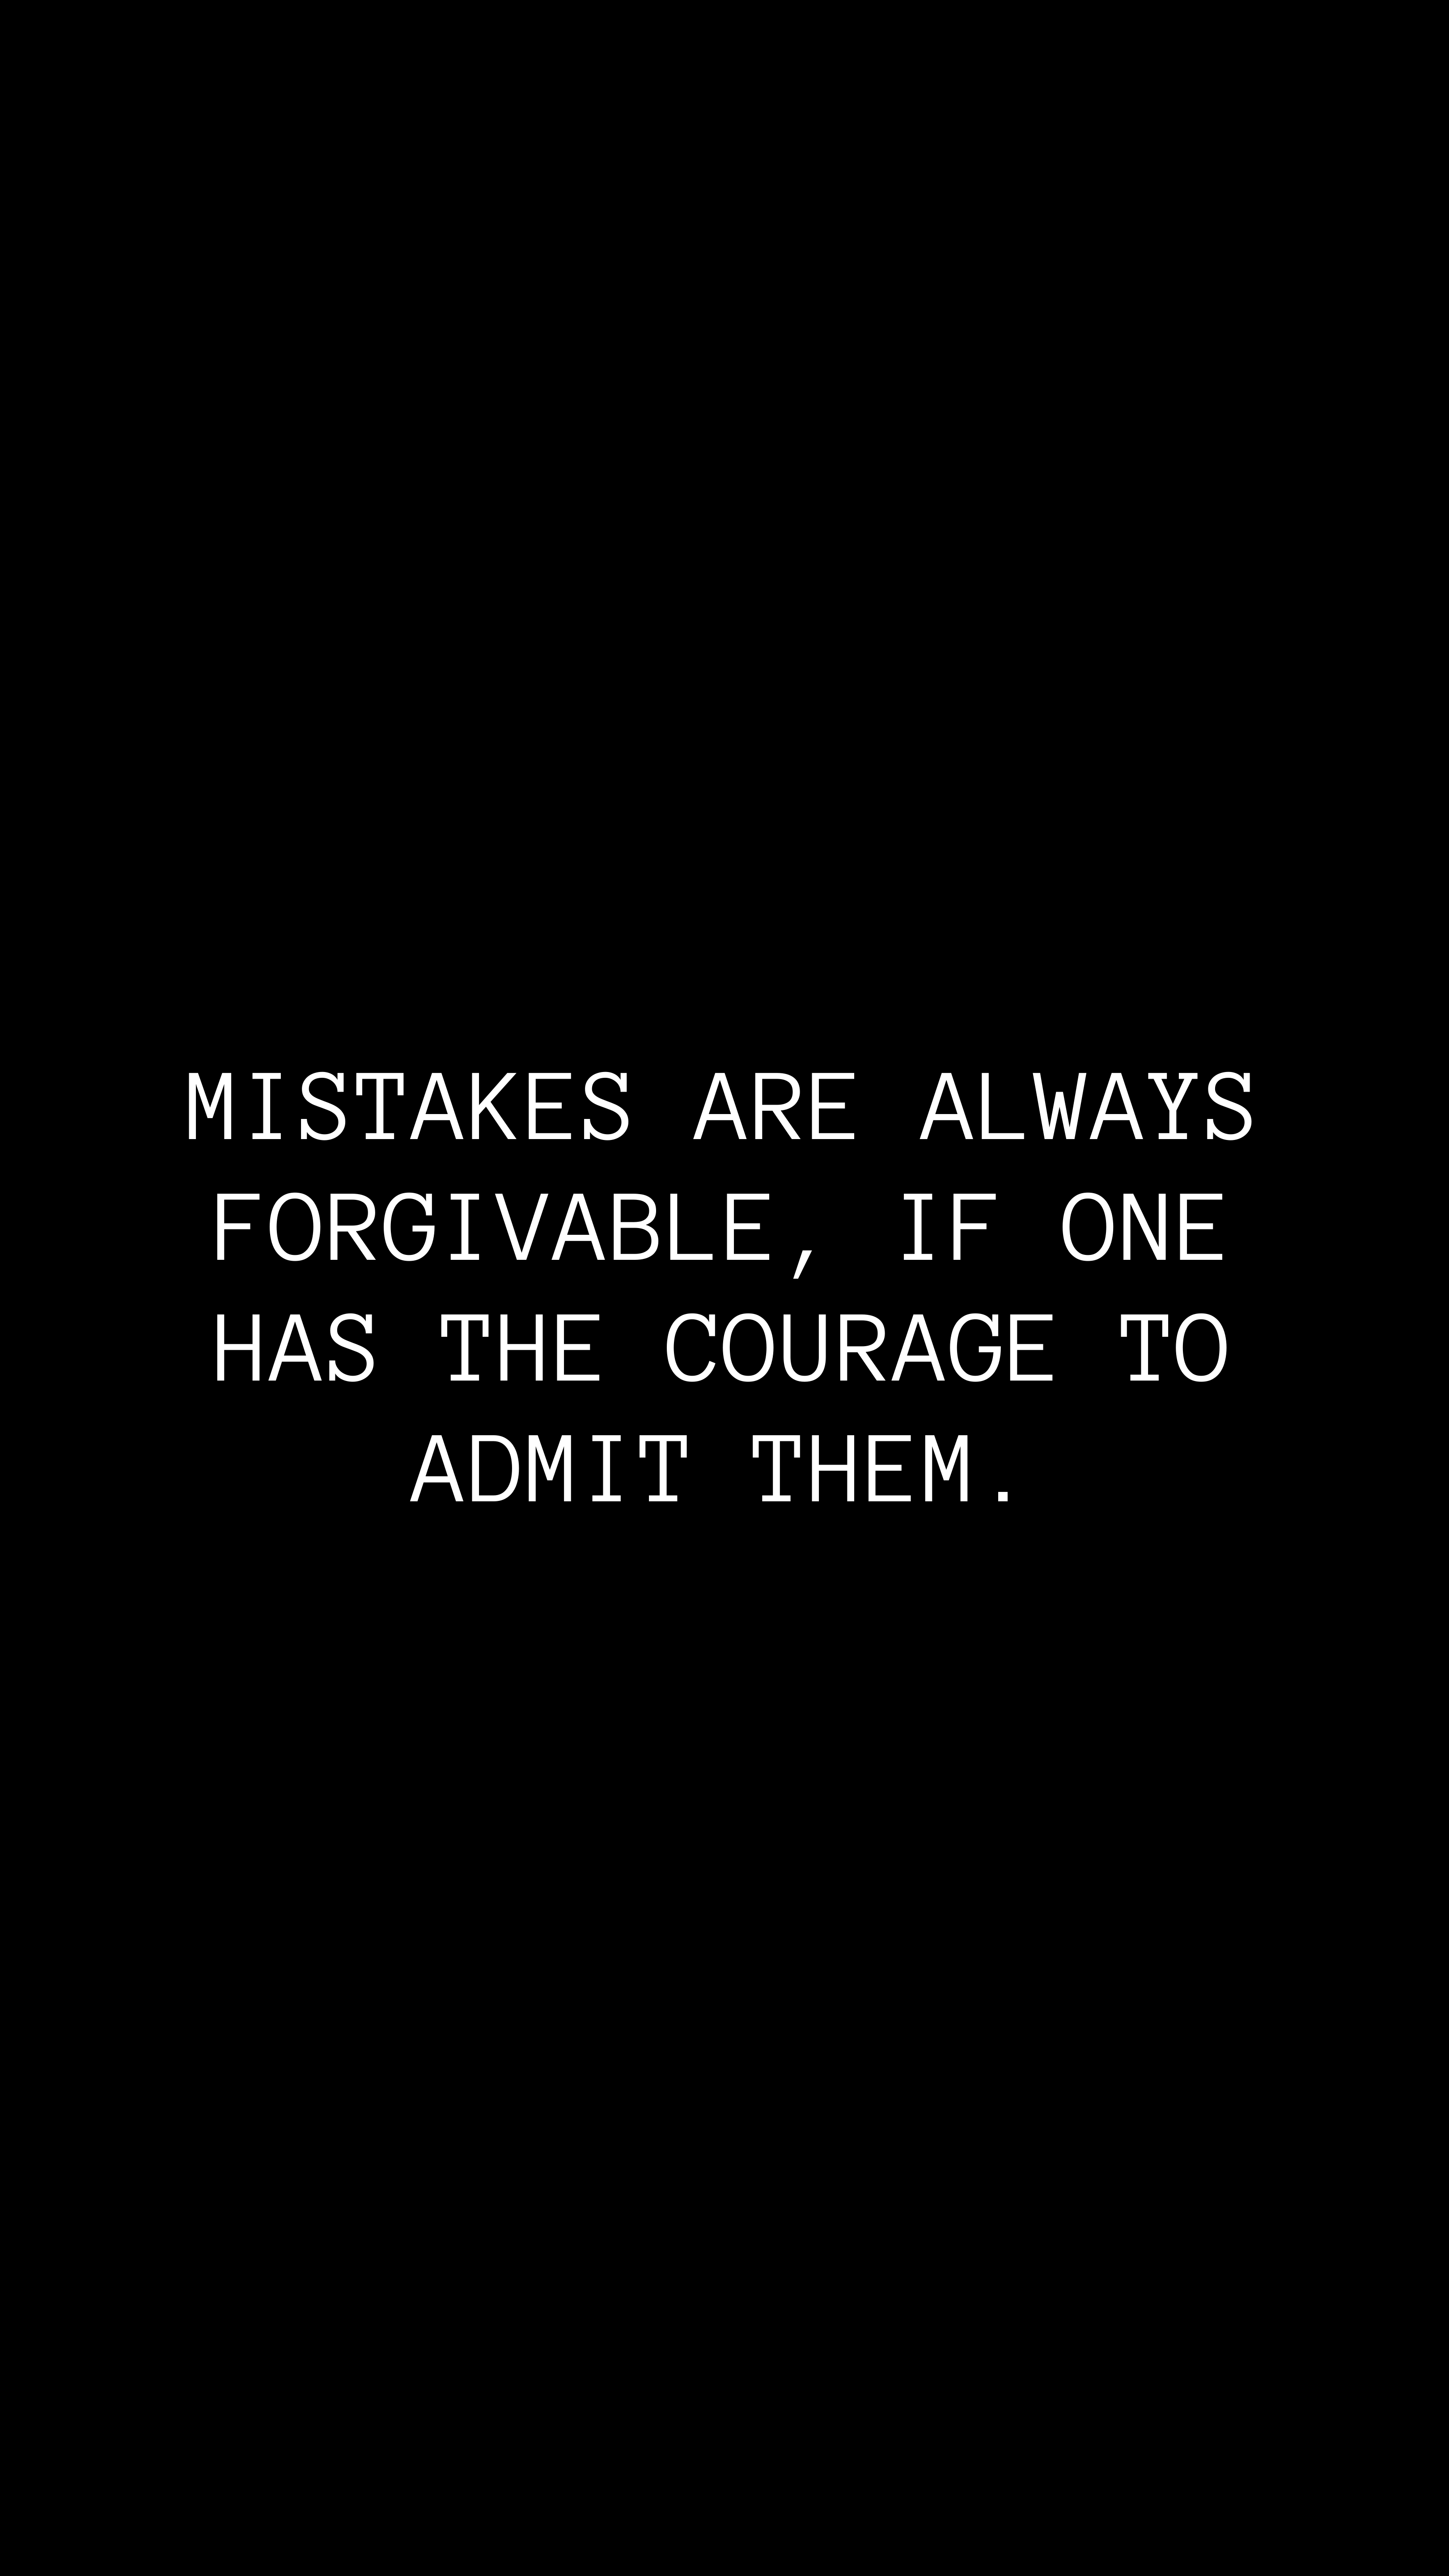 quote, phrase, quotation, words, utterance, errors, courage download HD wallpaper